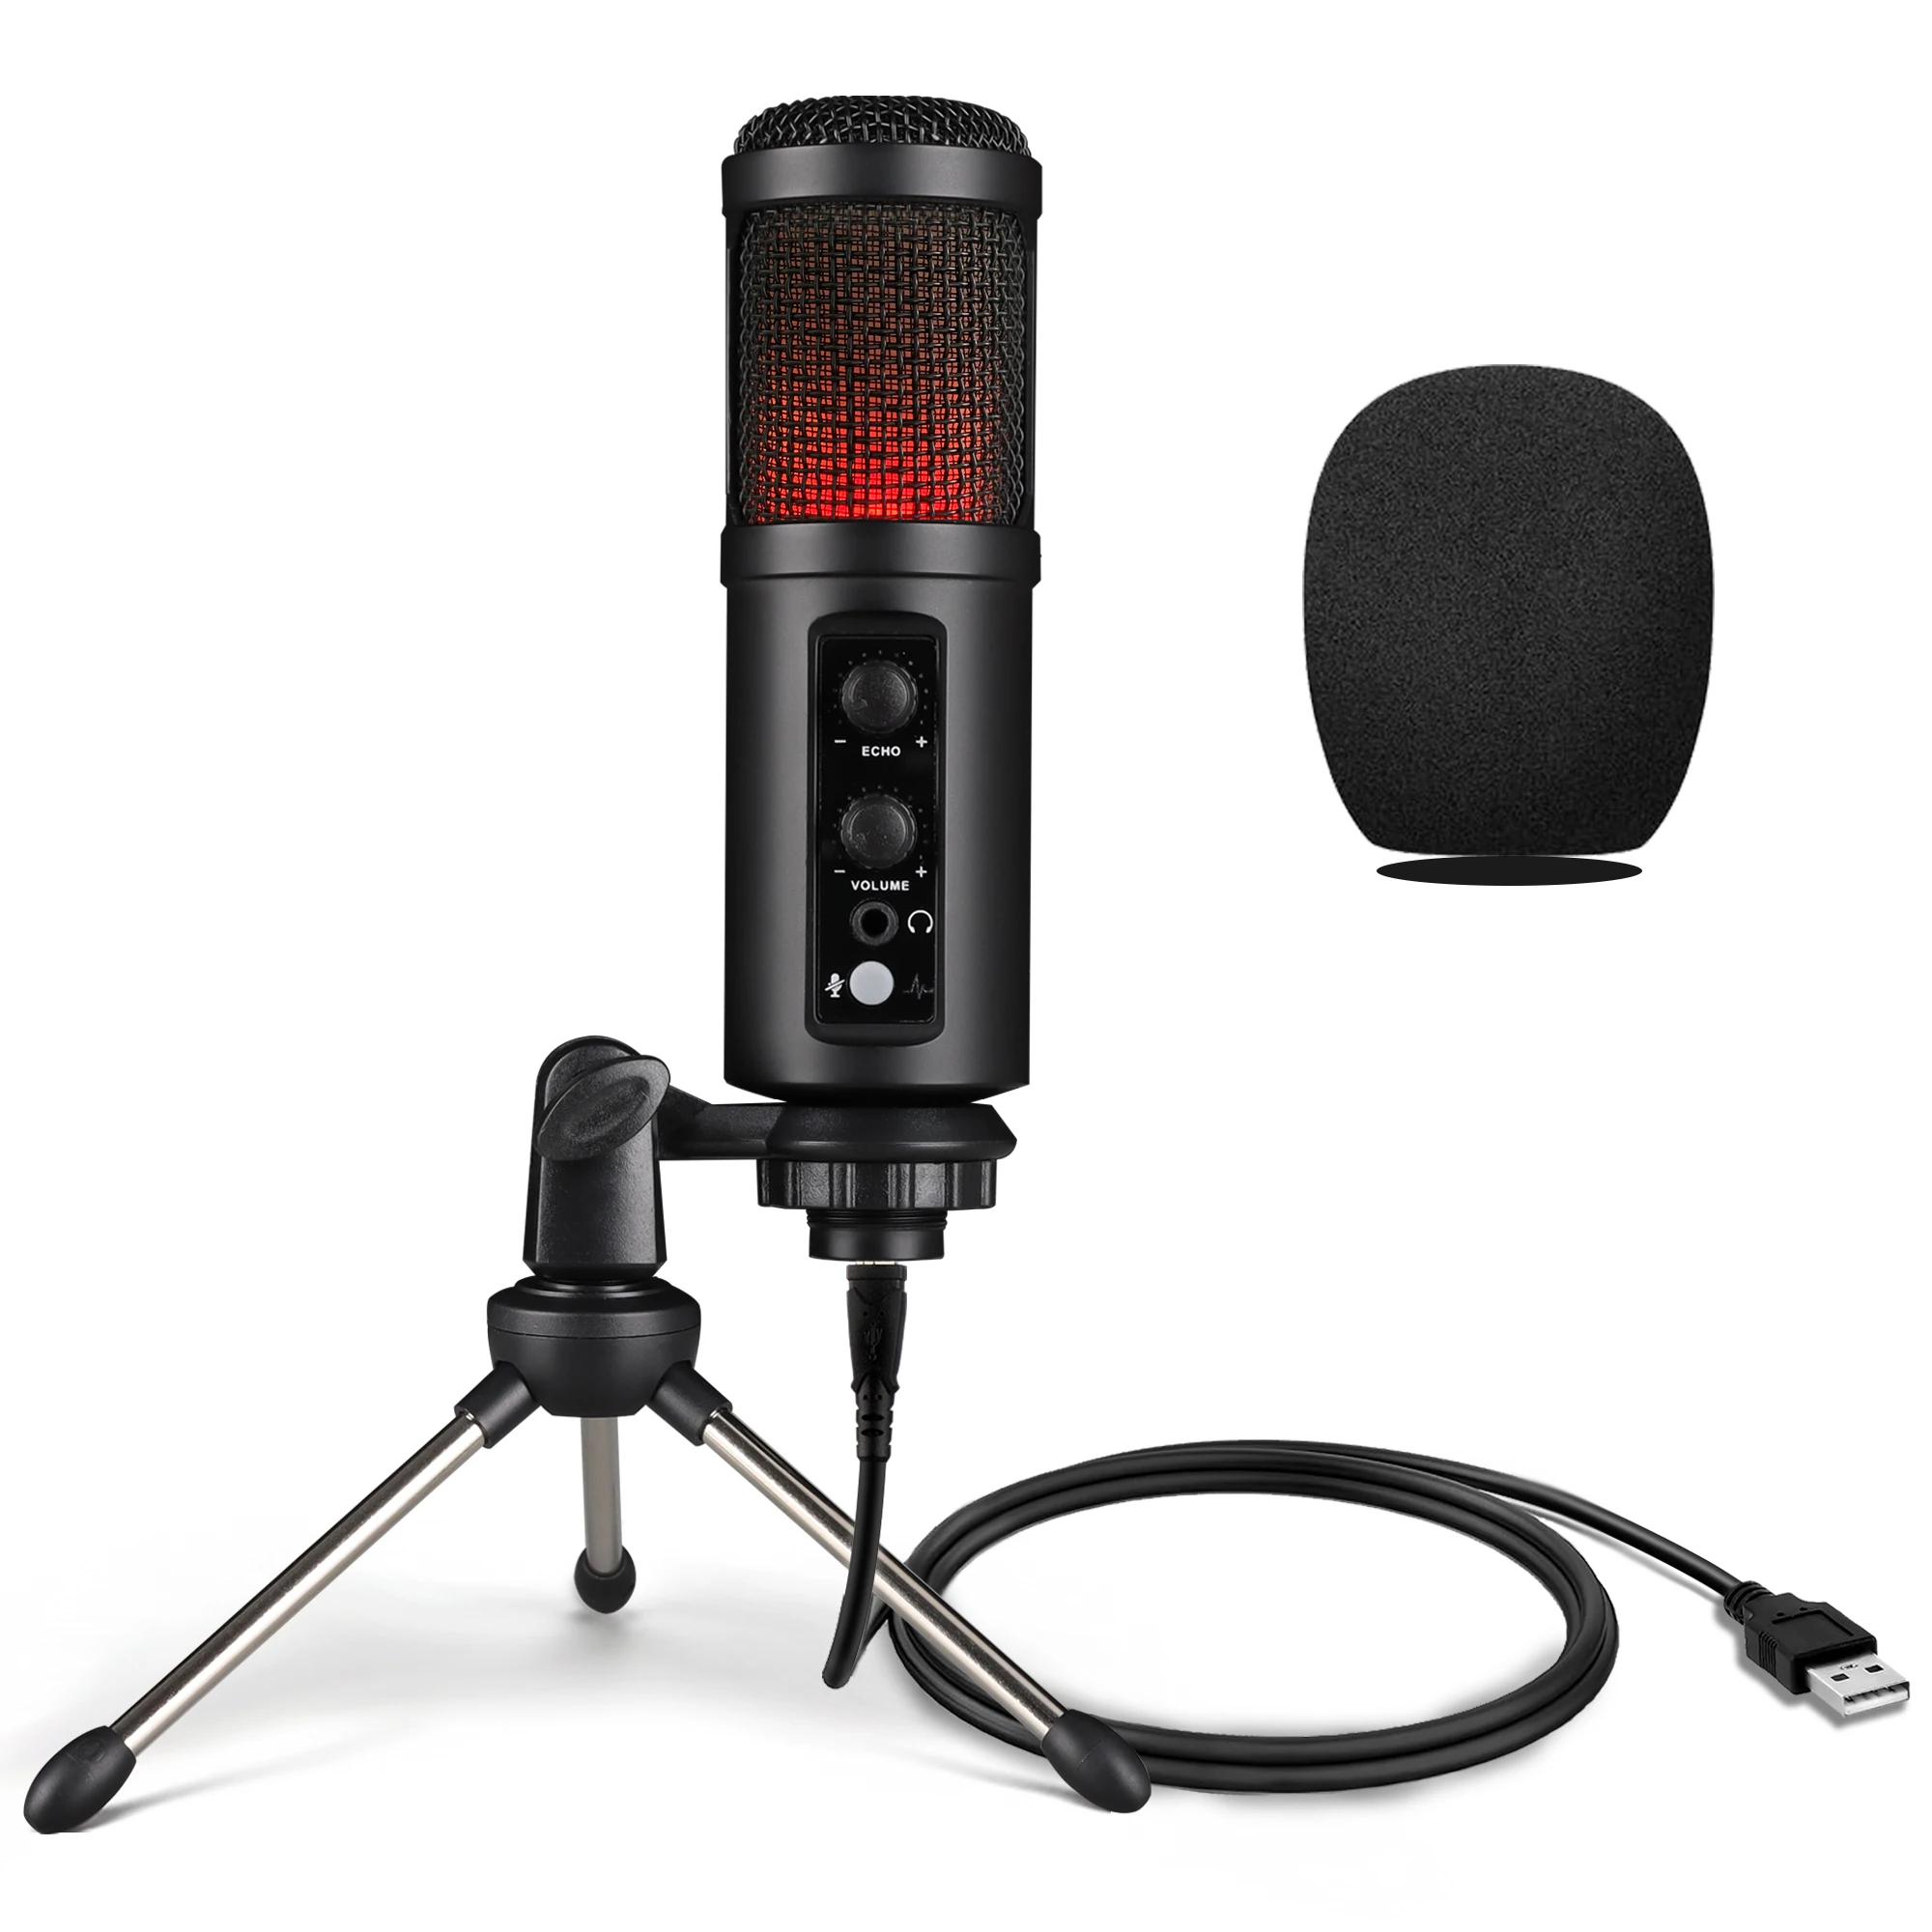 USB Condenser Recording Microphone for PC Laptop Recording Streaming Gaming Singing, Echo Controlled Desktop Mic 850RGB